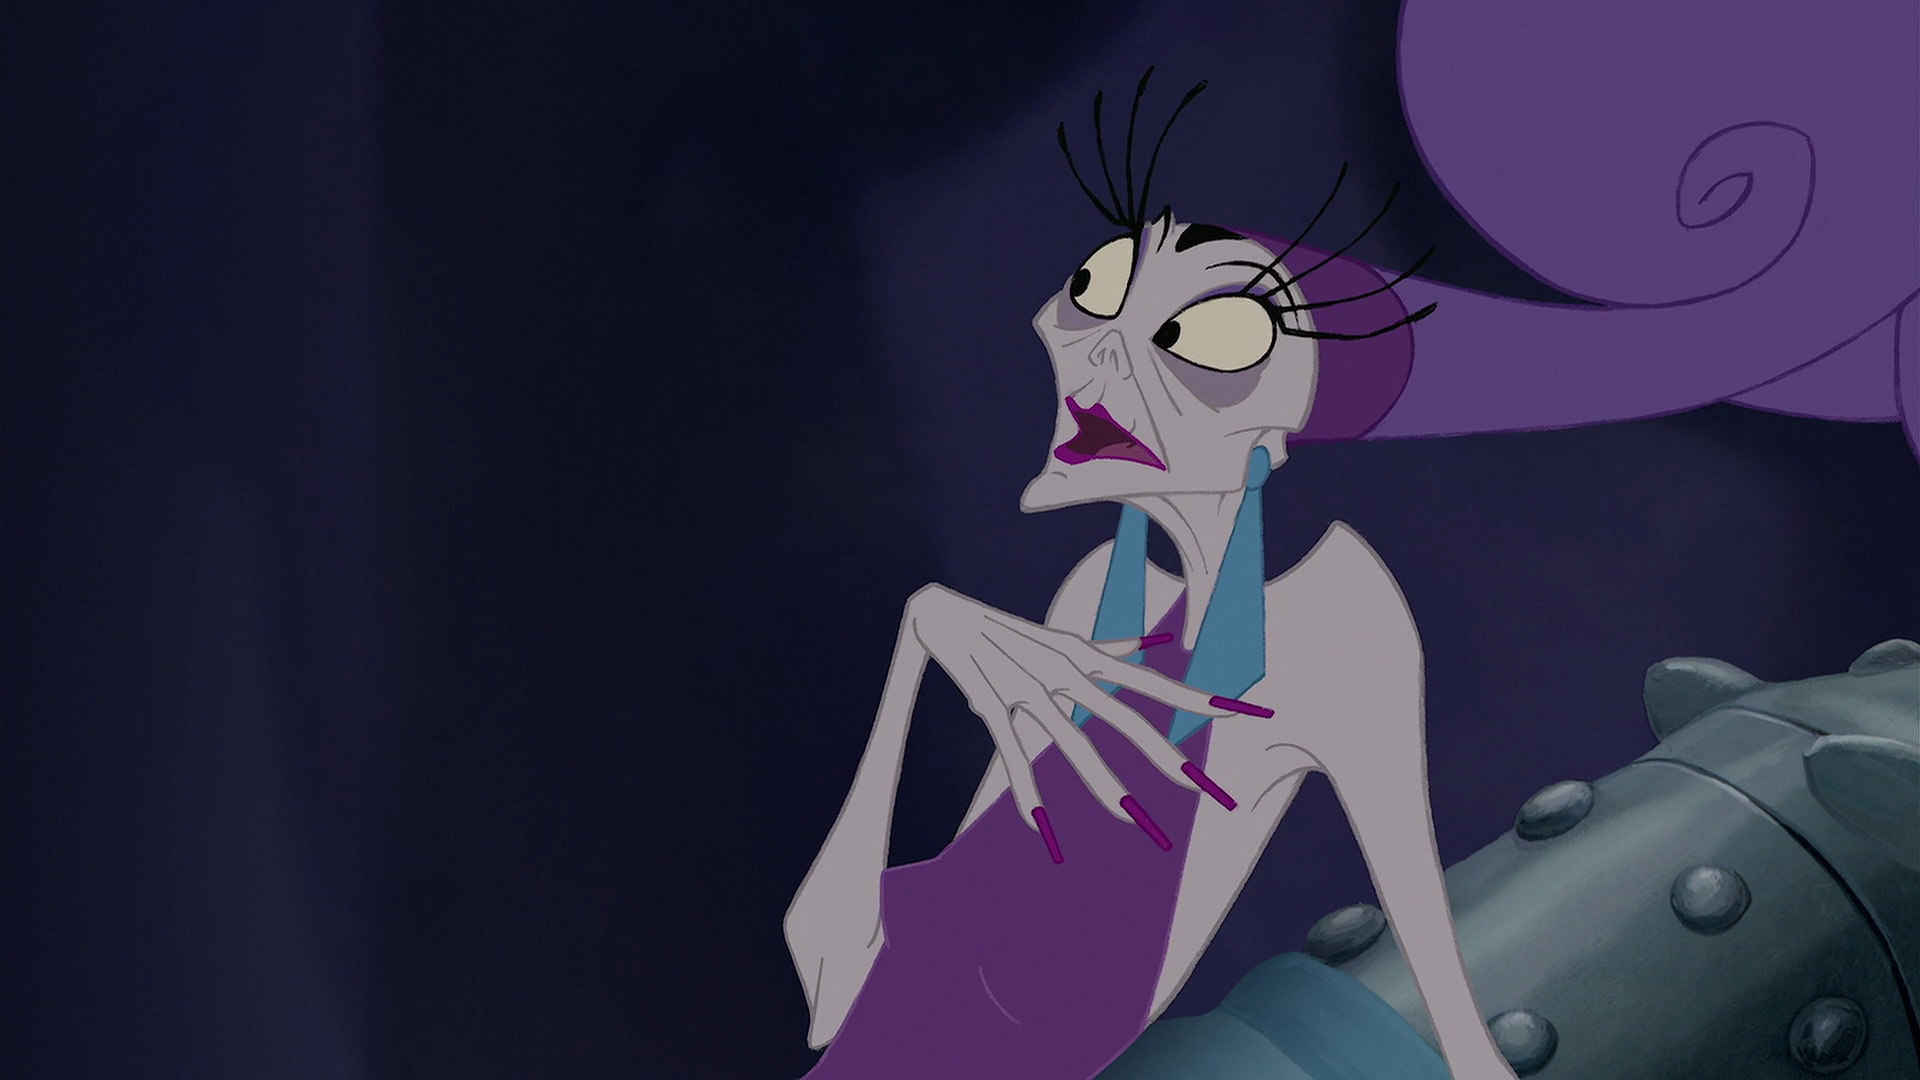 If Yzma from The Emperor's New Groove was an official DP Villain, wher...